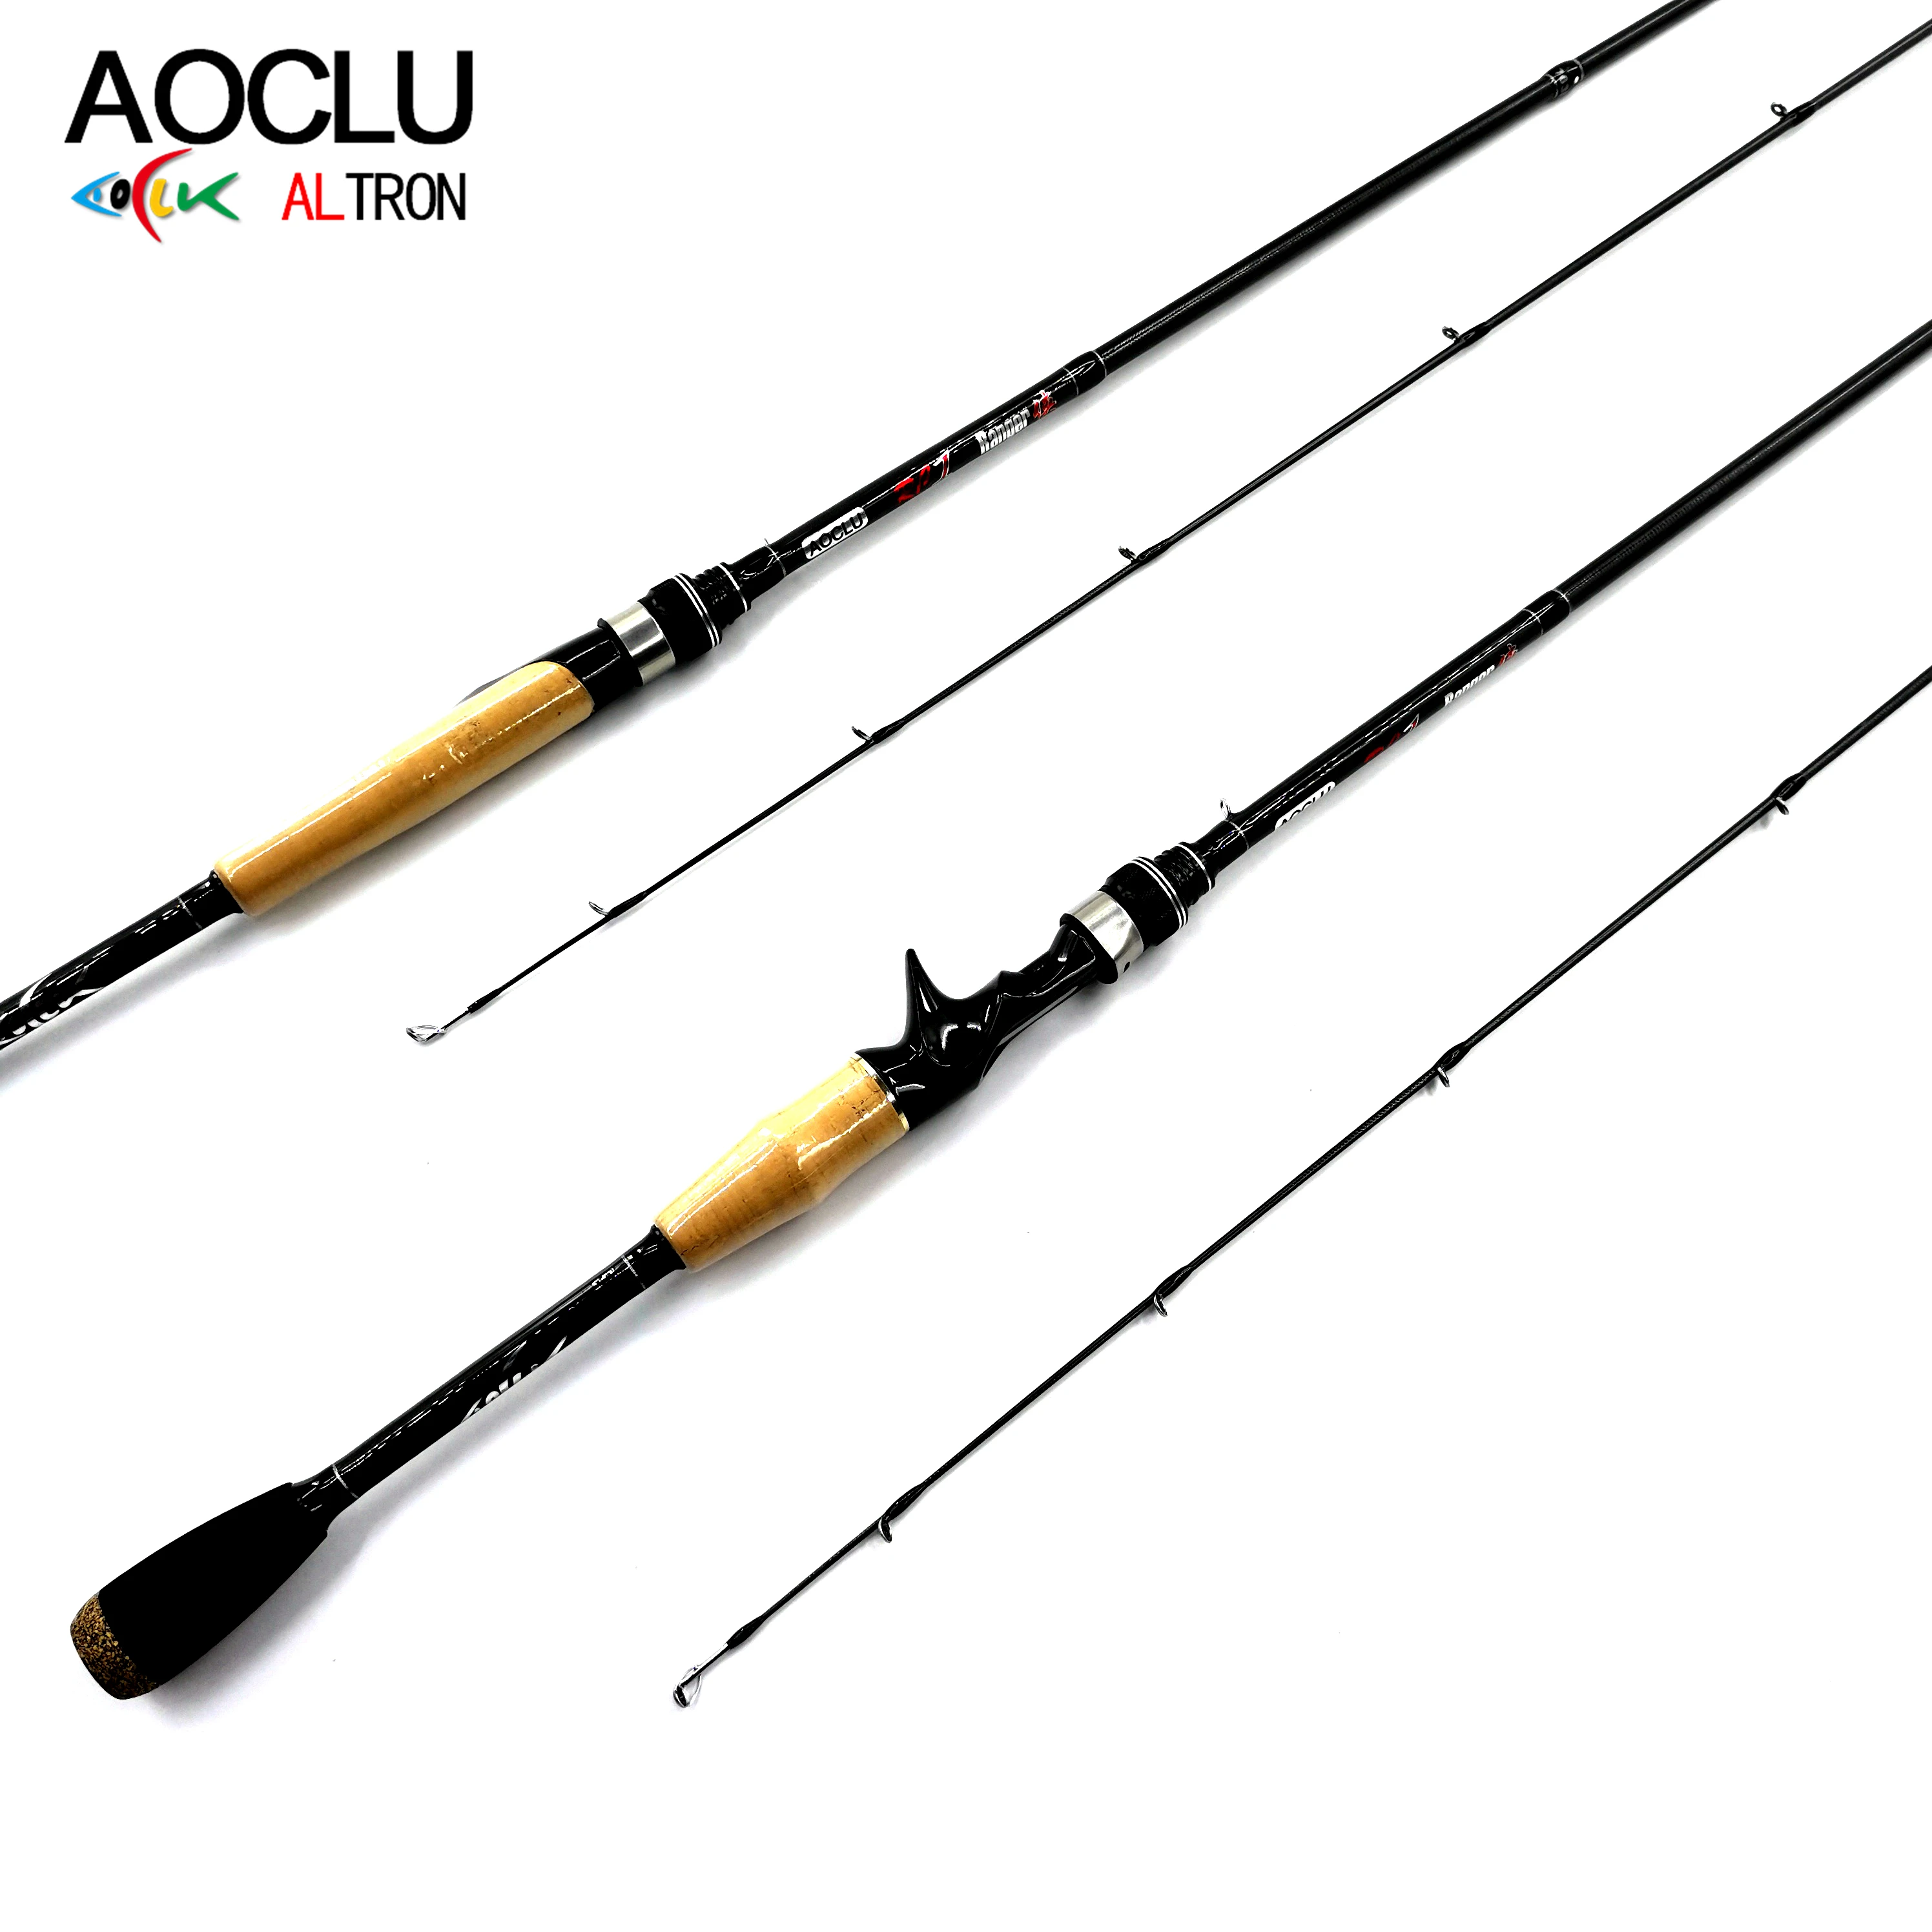 

AOCLU Qualified Fishing Rod IM6 100% 24T carbon 3PC Spinning and 7' Light Baitcasting Style For Saltwater/Freshwater Fishing